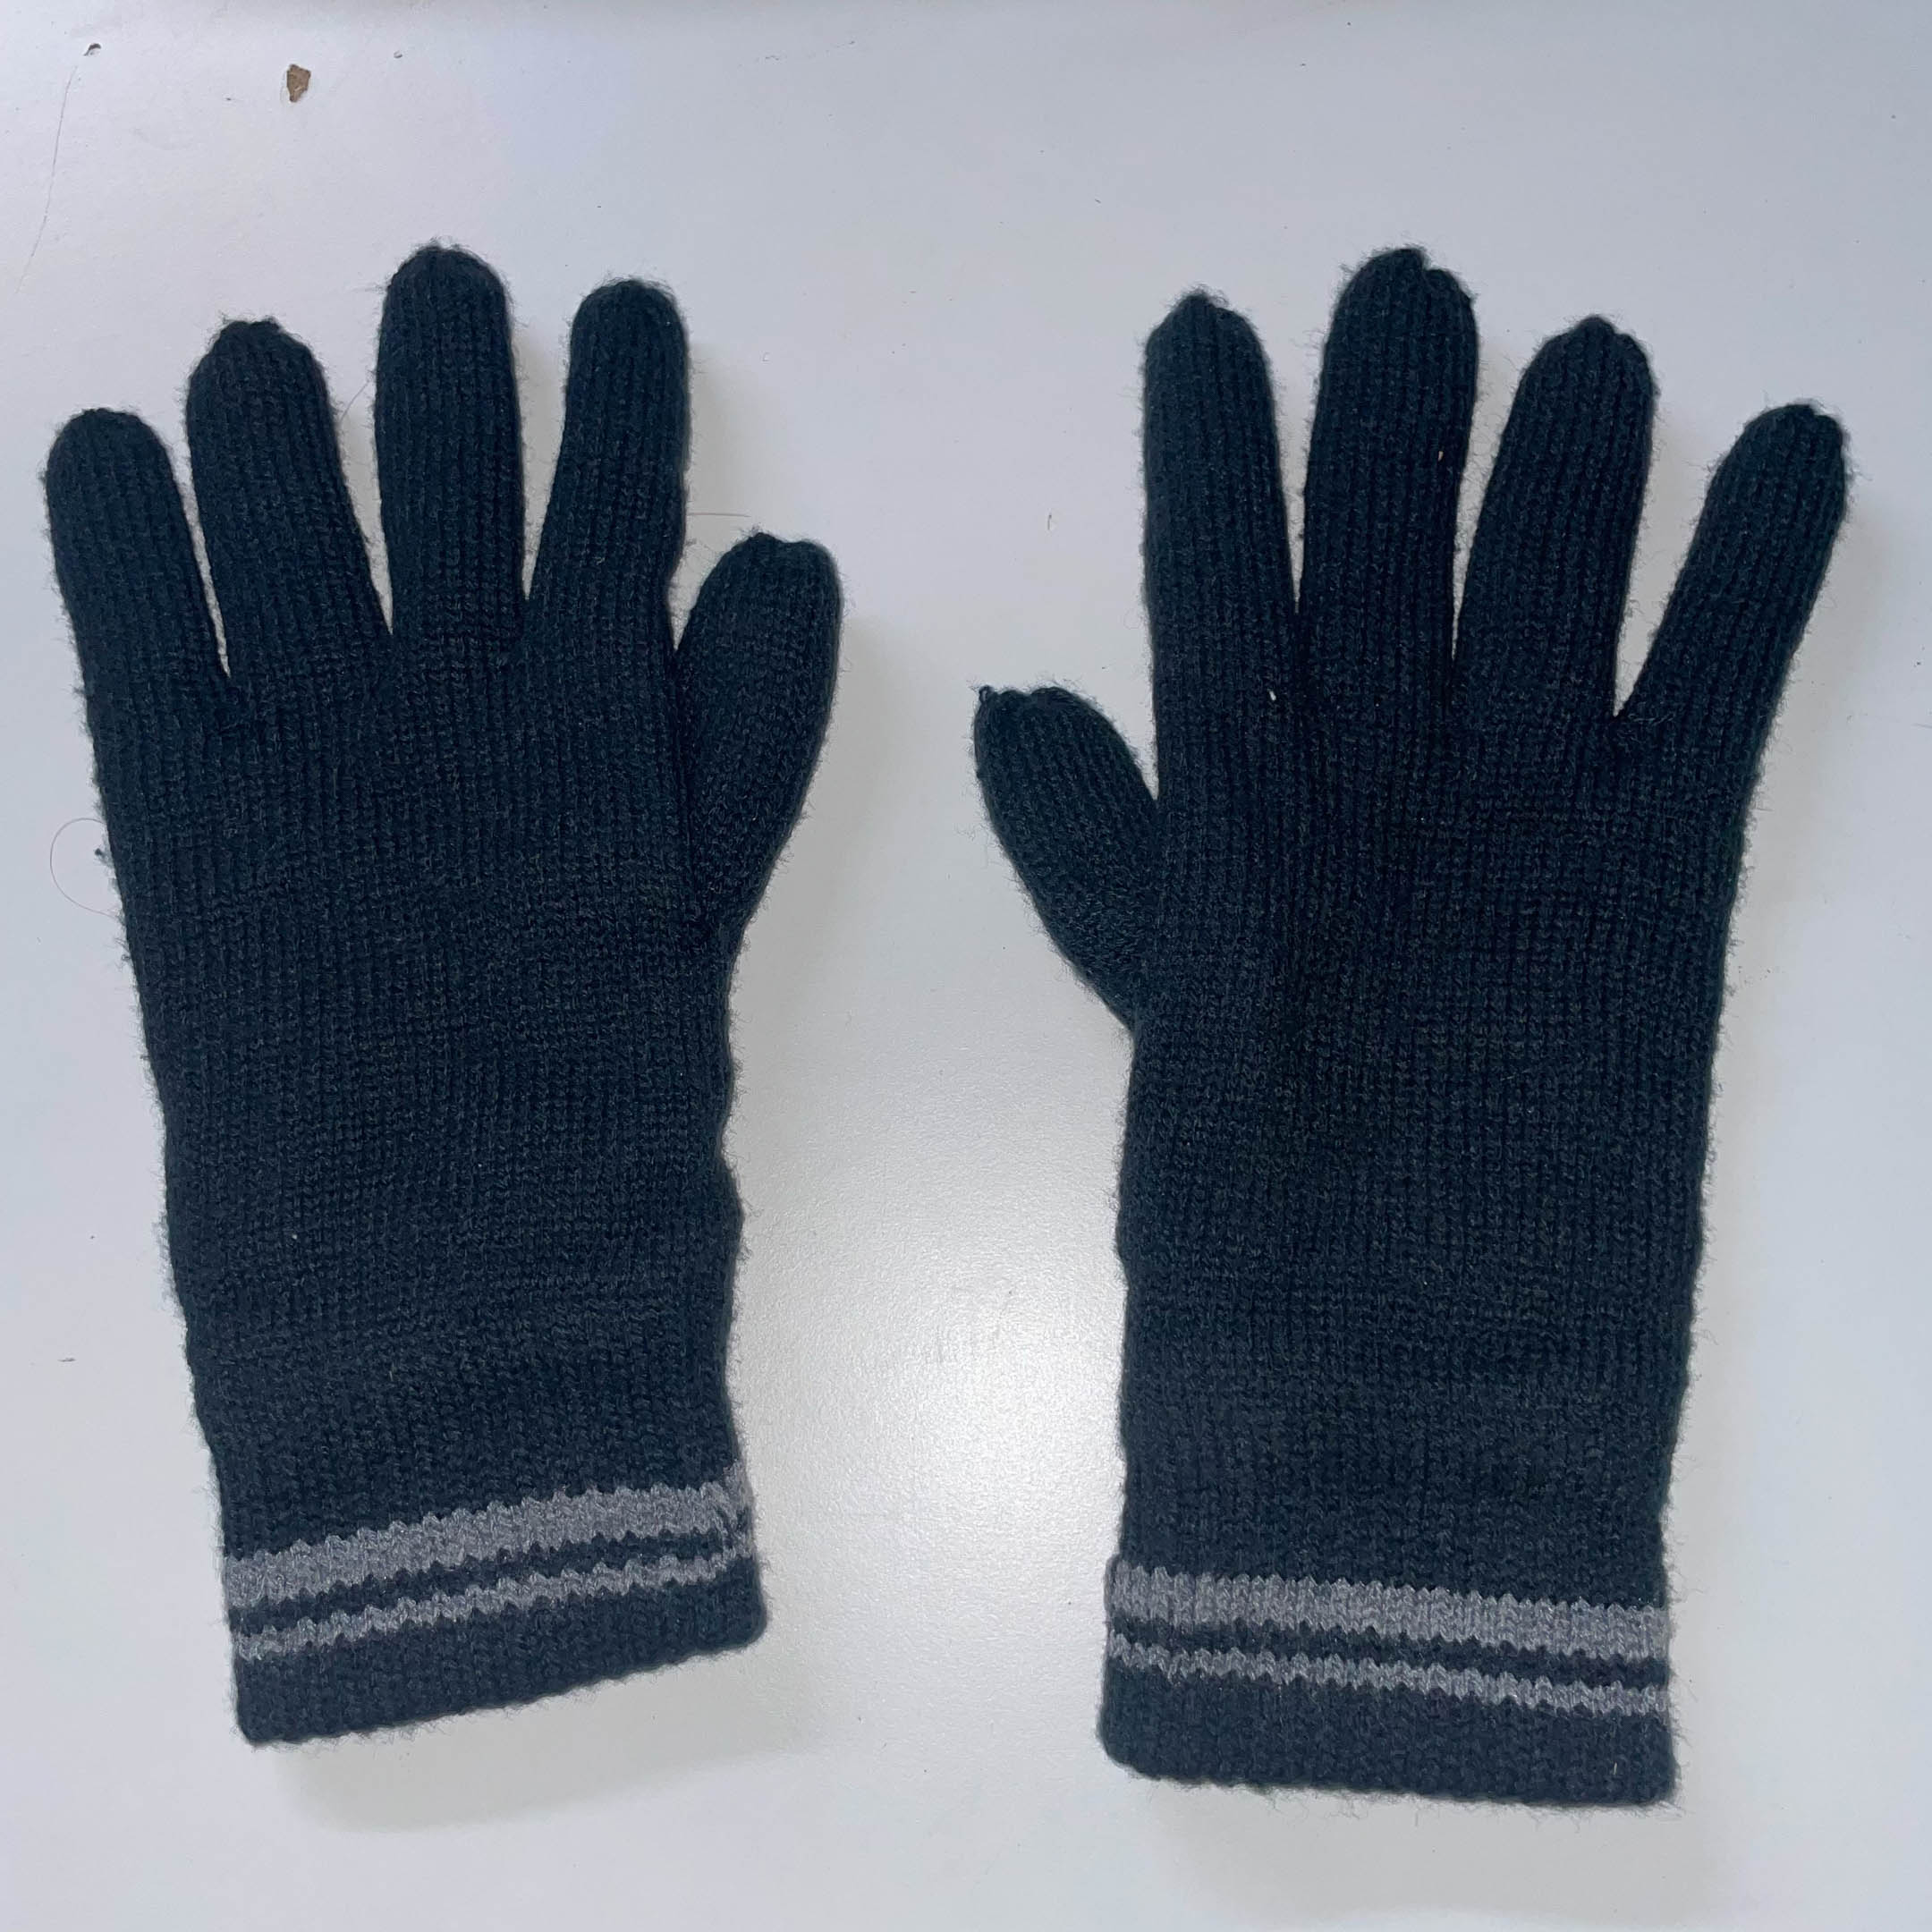 Vintage Peacock hand knitted navy blue glove